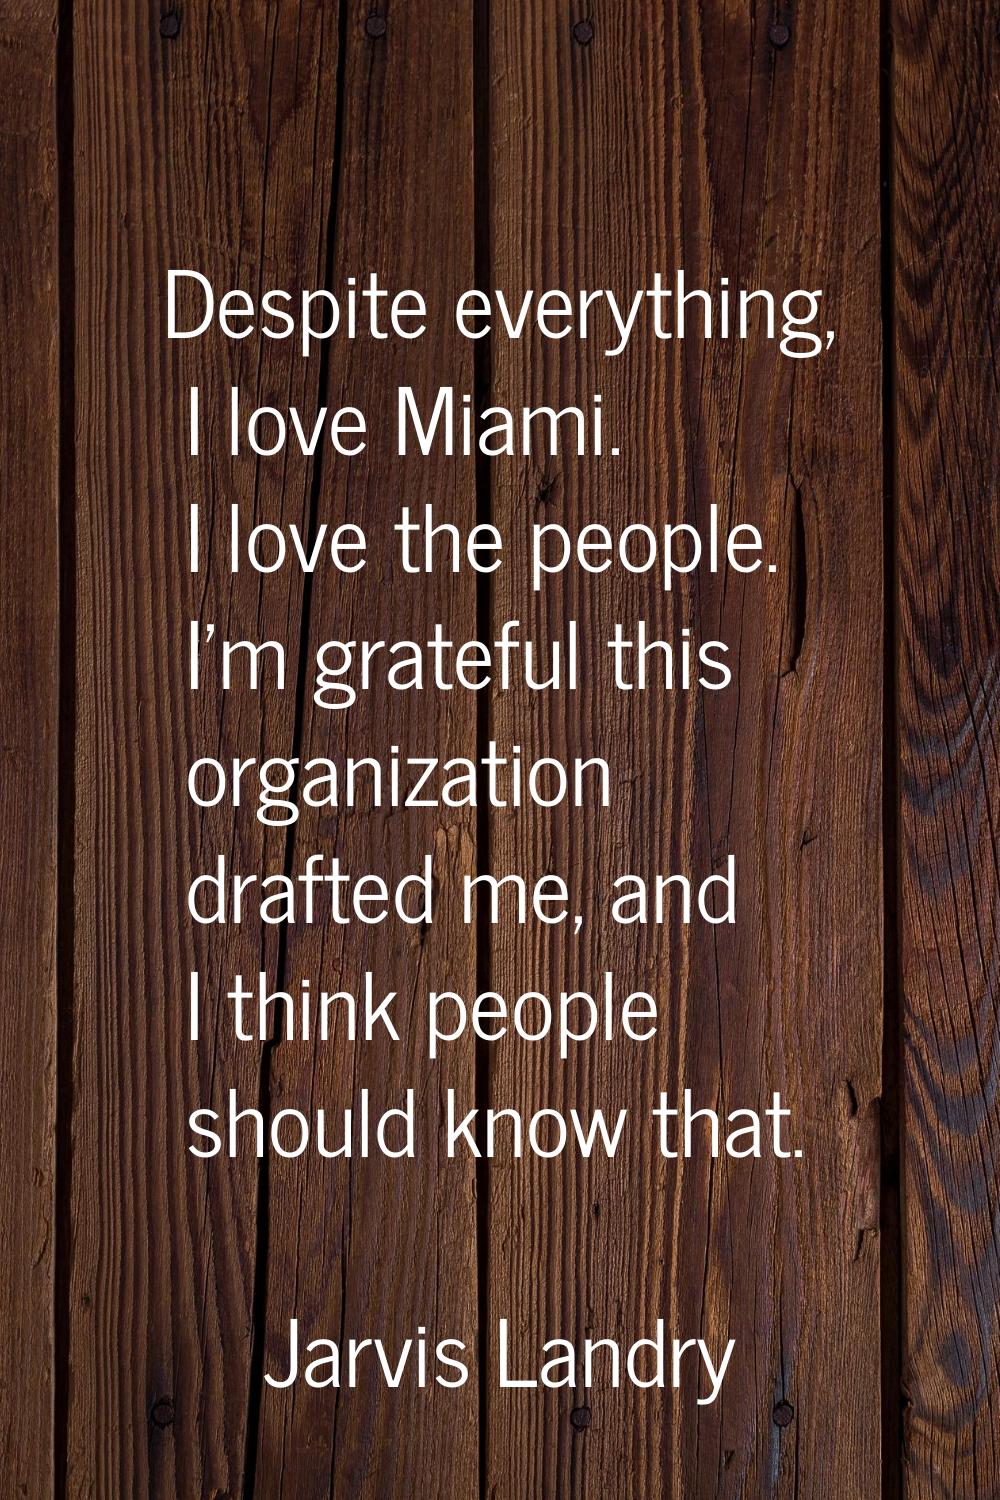 Despite everything, I love Miami. I love the people. I'm grateful this organization drafted me, and